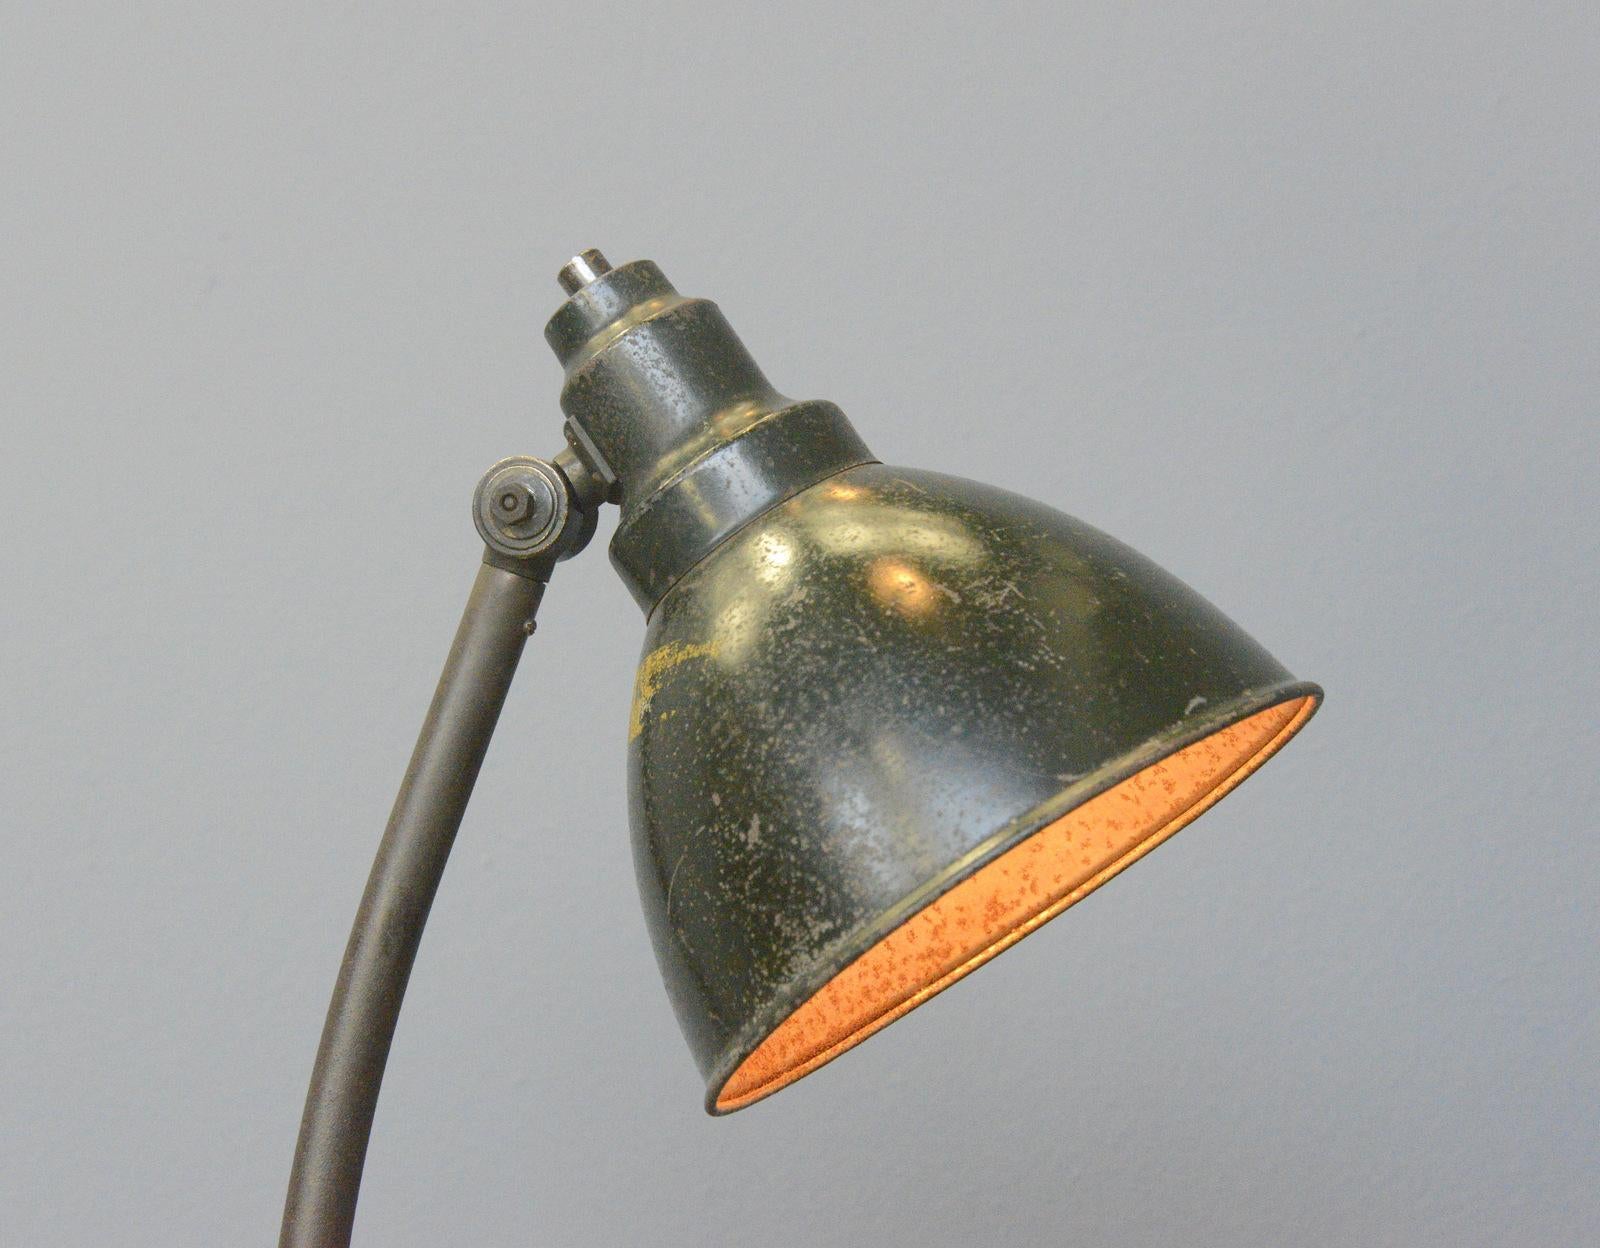 Kandem Model 573 table lamp Circa 1920s

- Pressed steel shade
- Steel arm
- Original On/Off toggle switch on the shade
- Cast iron base
- Original paint
- Takes E27 fitting bulbs
- Model 573
- Produced by Körting & Mathiesen, Leipzig
-